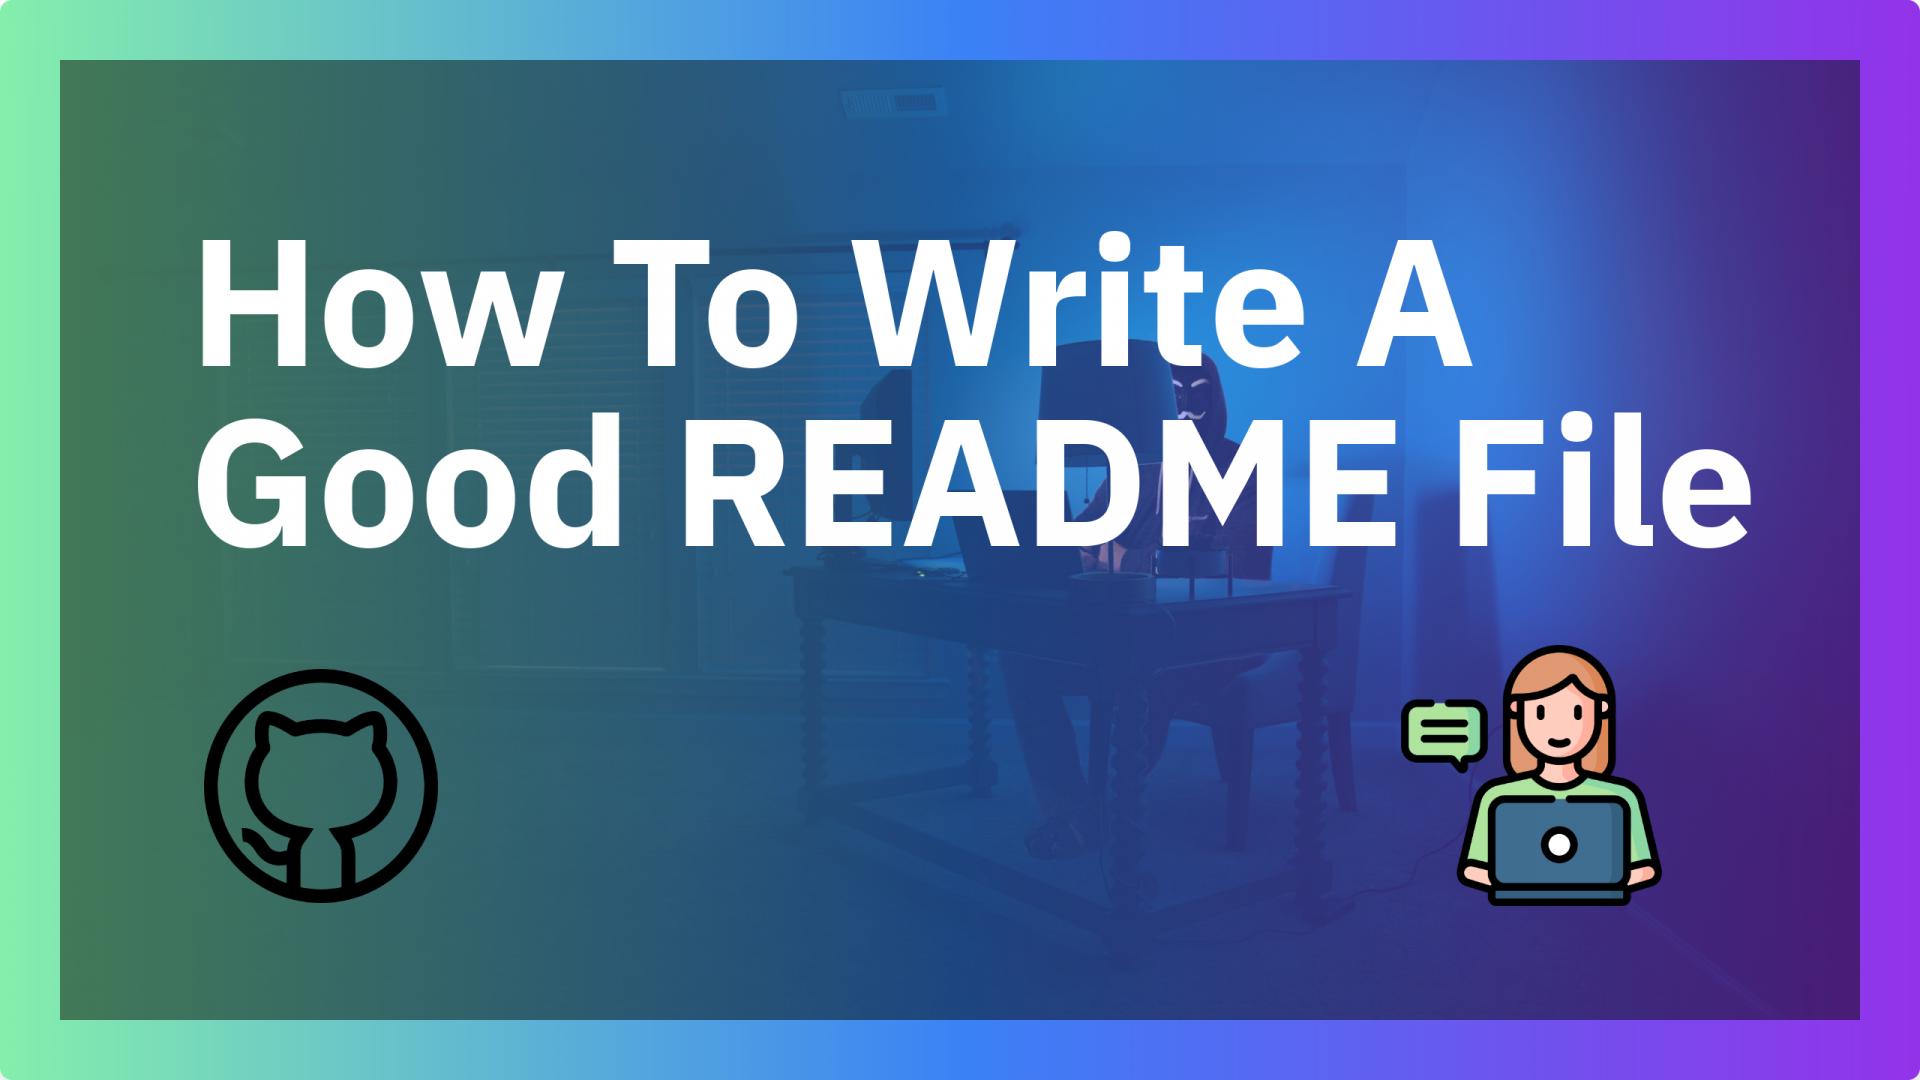 How To Write A Good README File